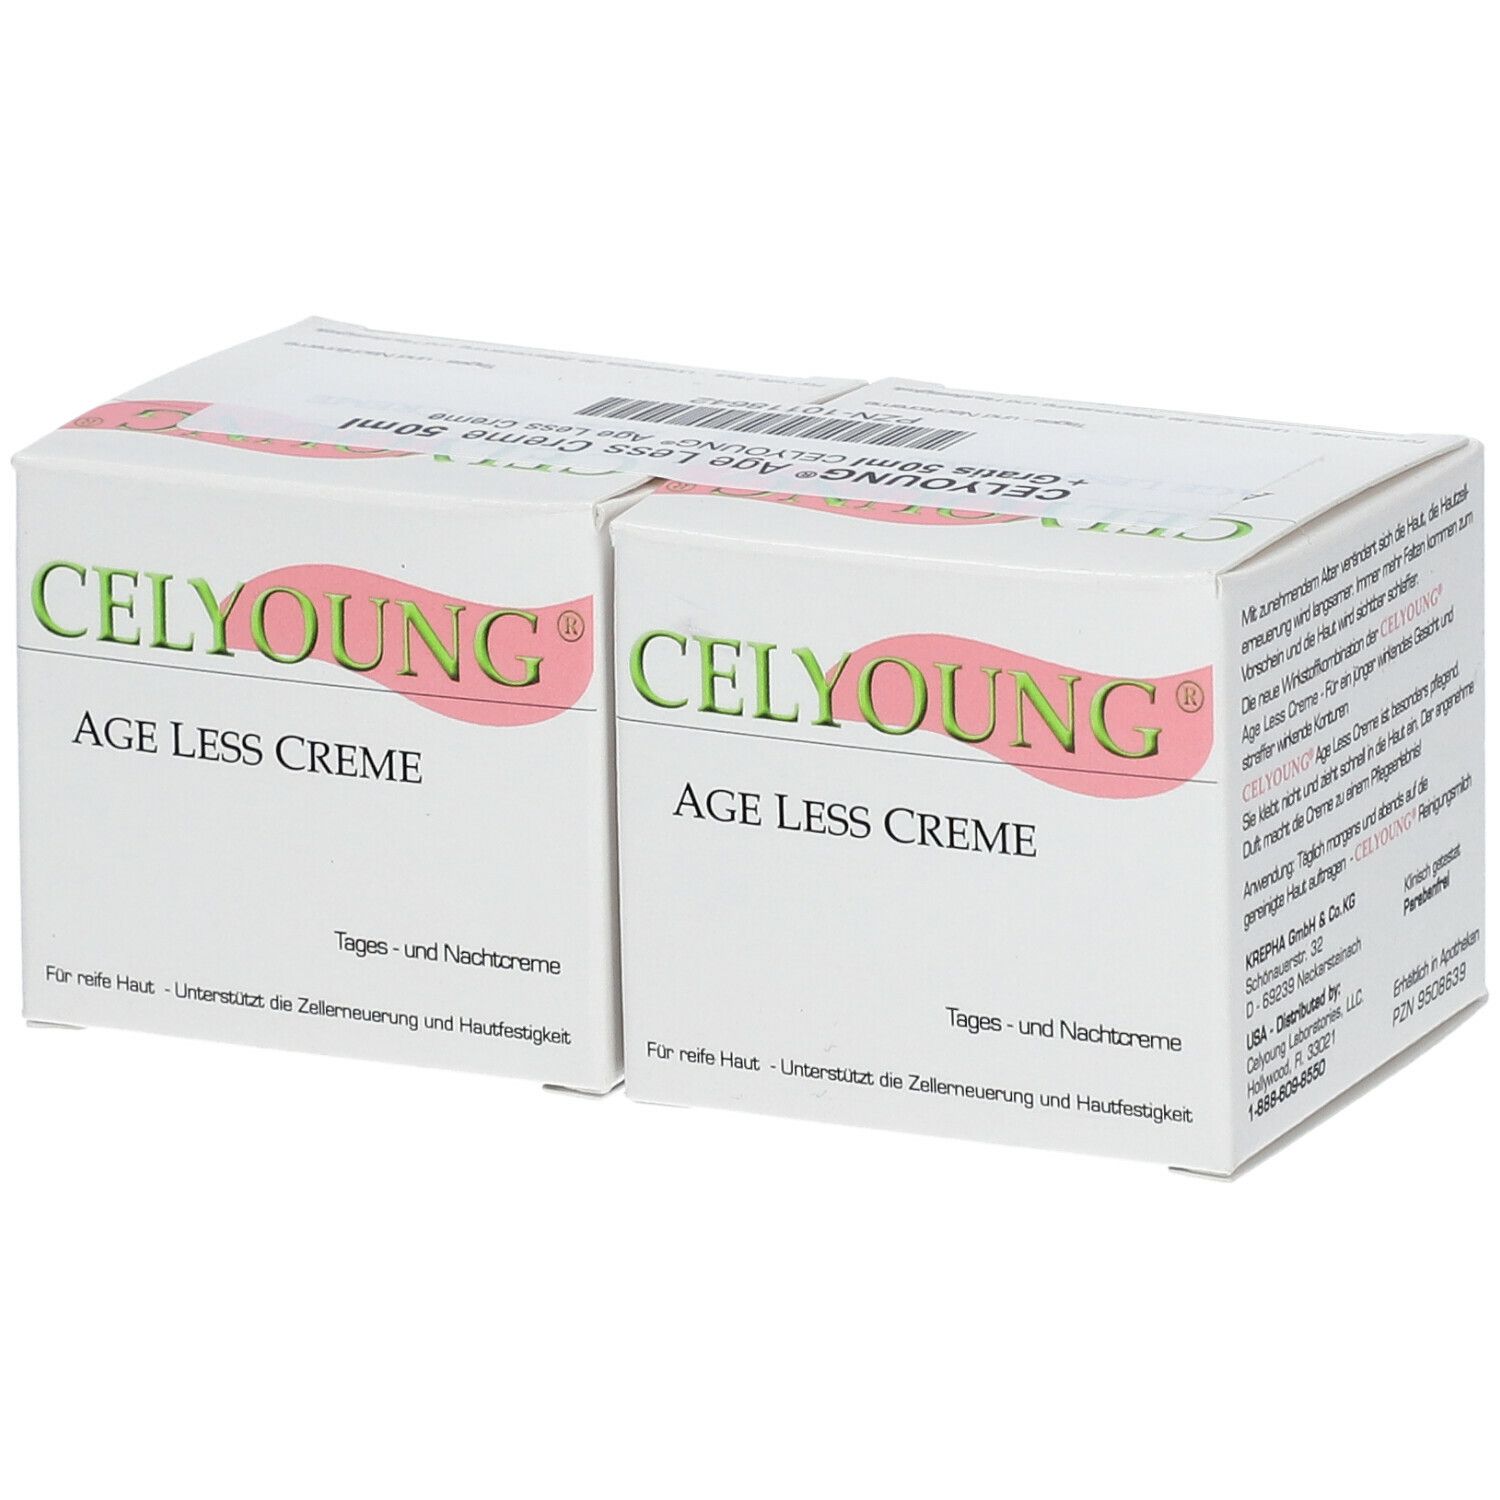 CELYOUNG® AGE LESS CREME + eine Packung GRATIS